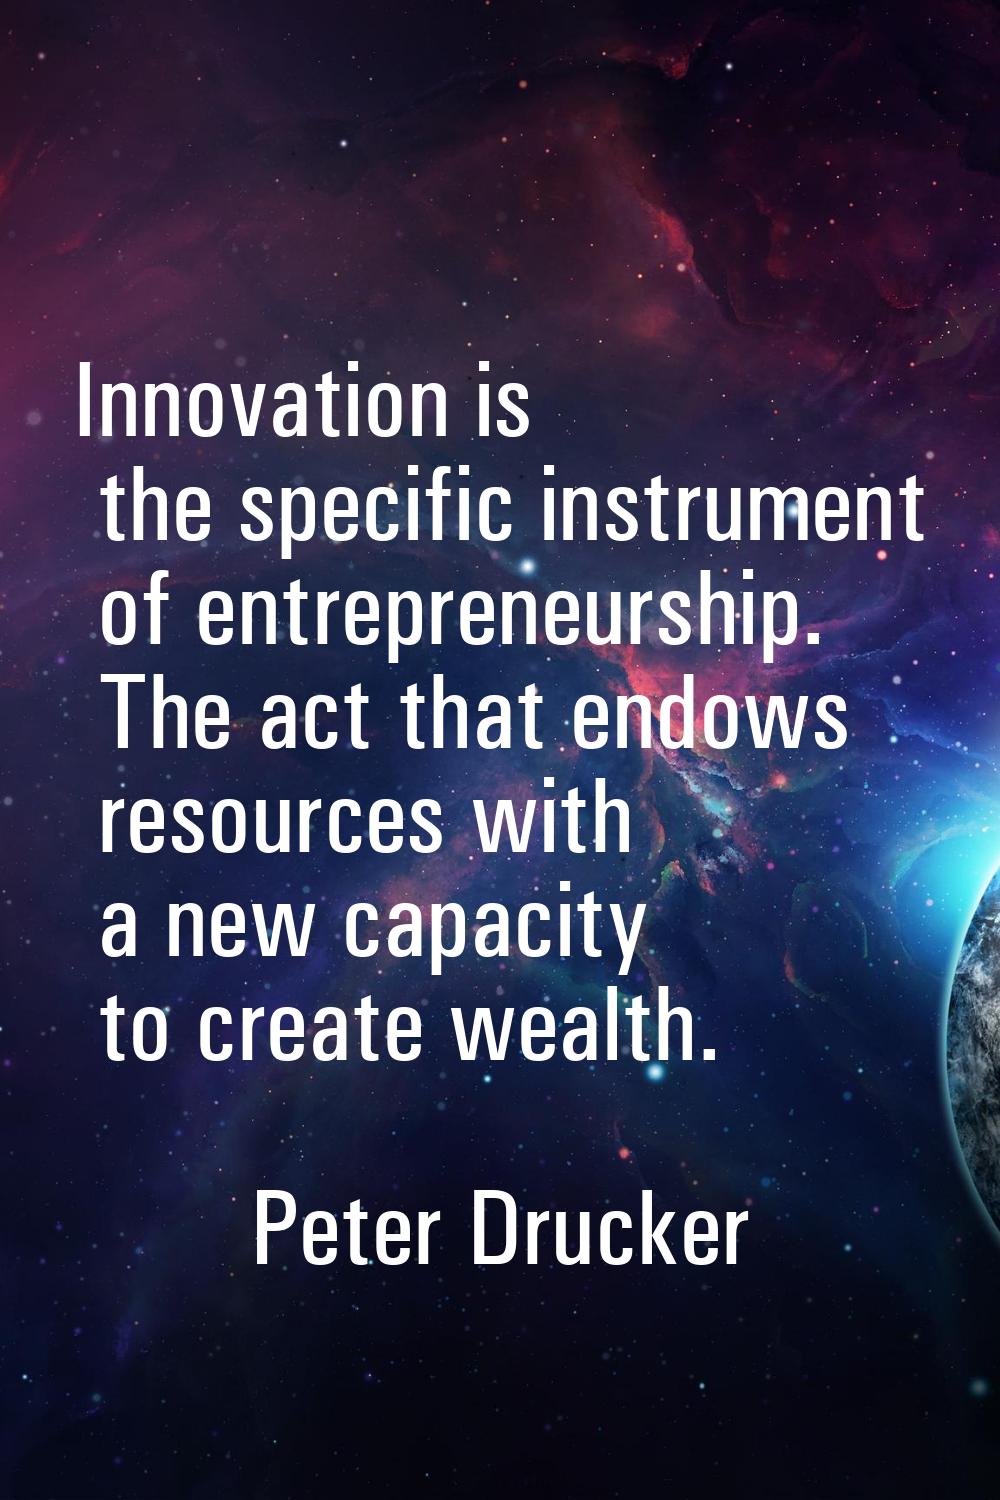 Innovation is the specific instrument of entrepreneurship. The act that endows resources with a new